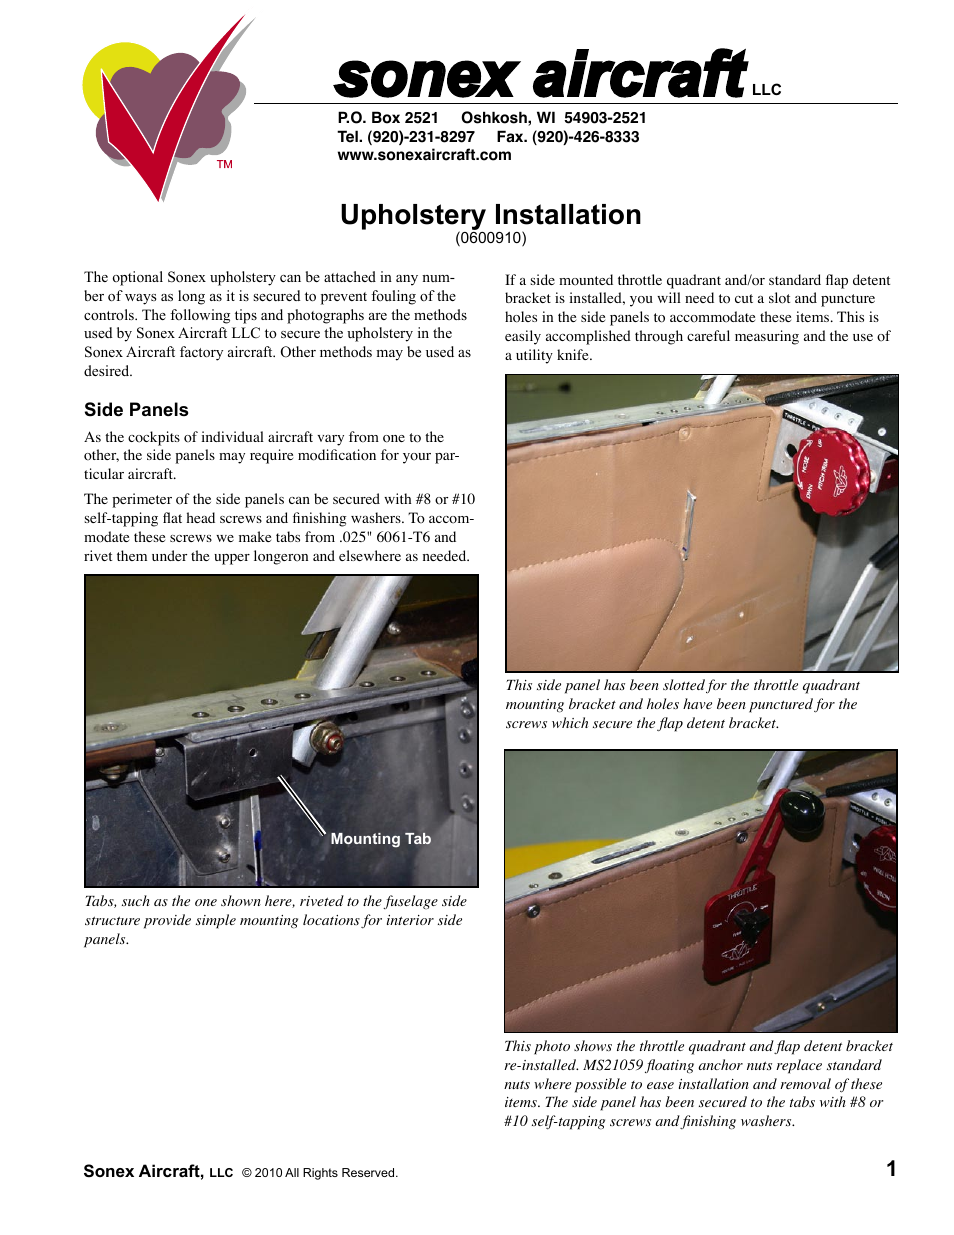 Upholstery Installation Instructions